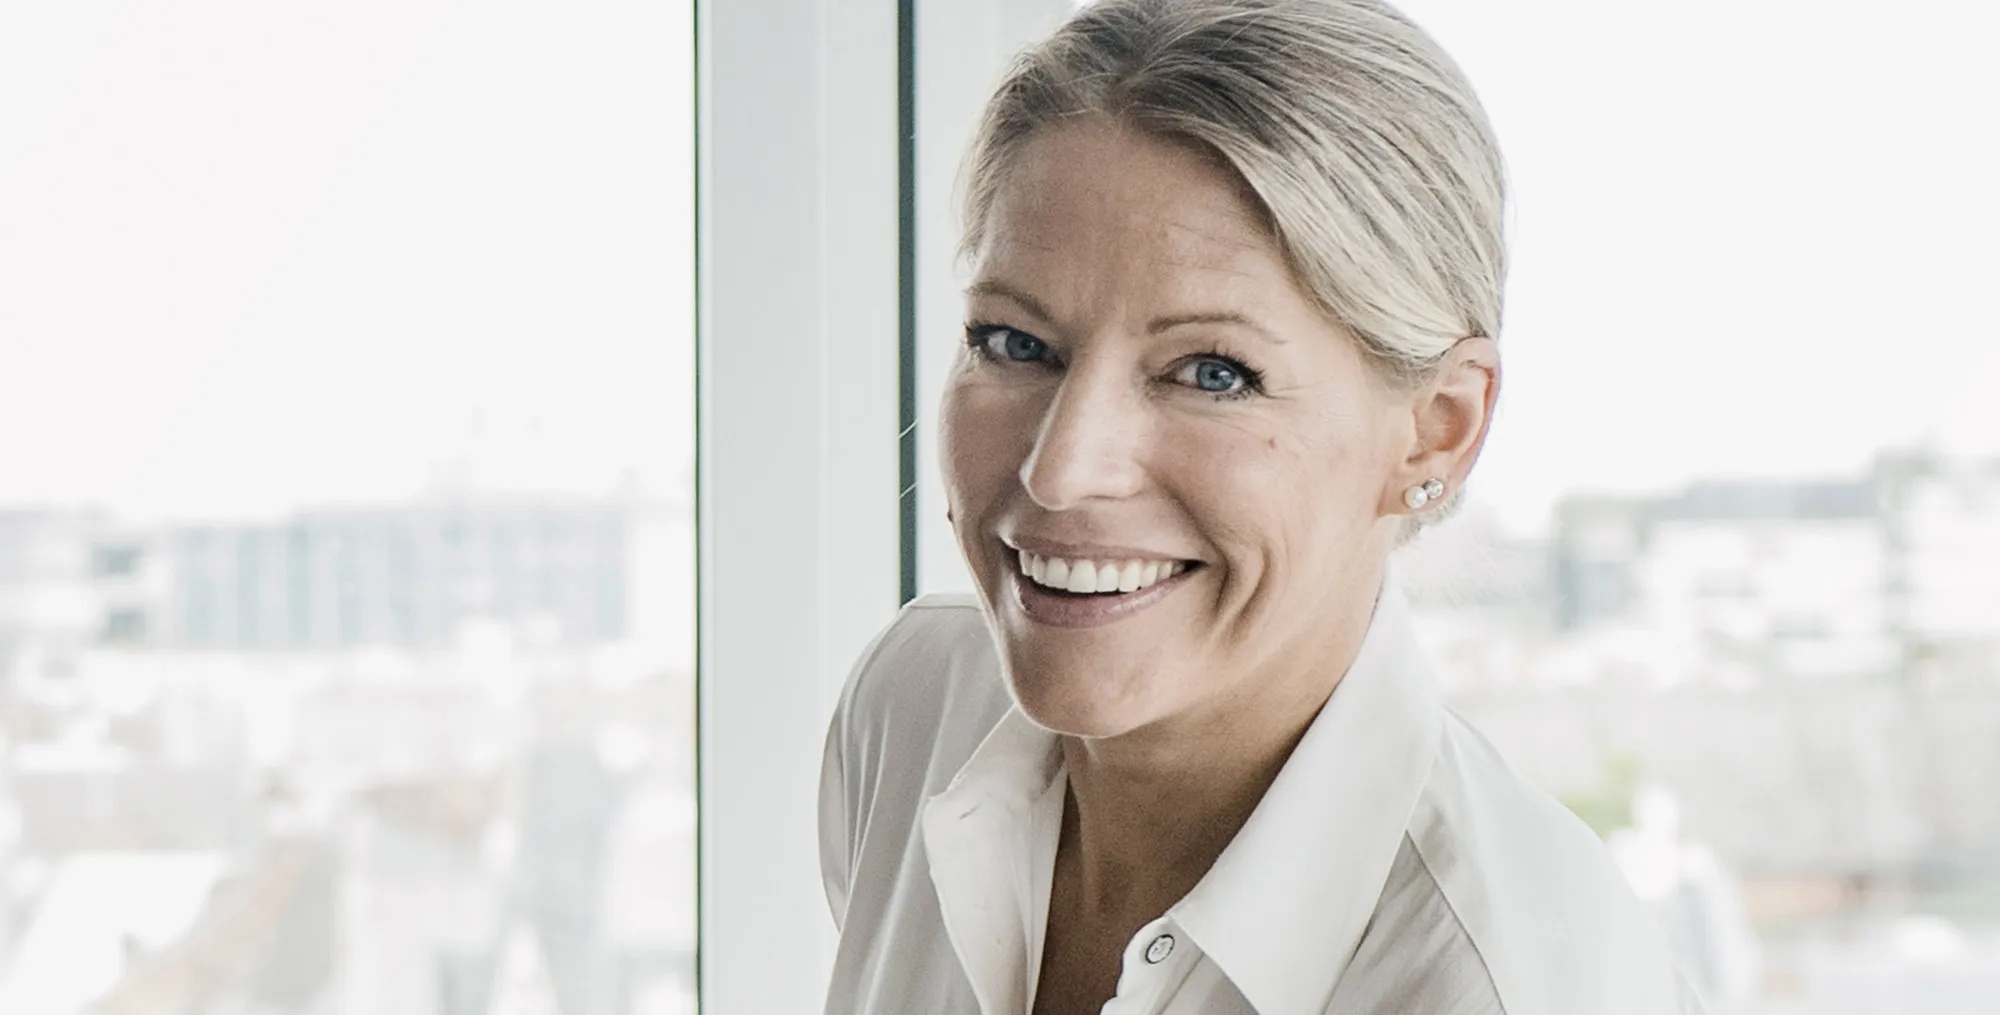 Kathrin Heerdt of Börgers lawyers, specialised law firm and notary for building law, real estate law, architects law, procurement law, commercial tenancy law, dispute consulting - Berlin, Hamburg, Stuttgart